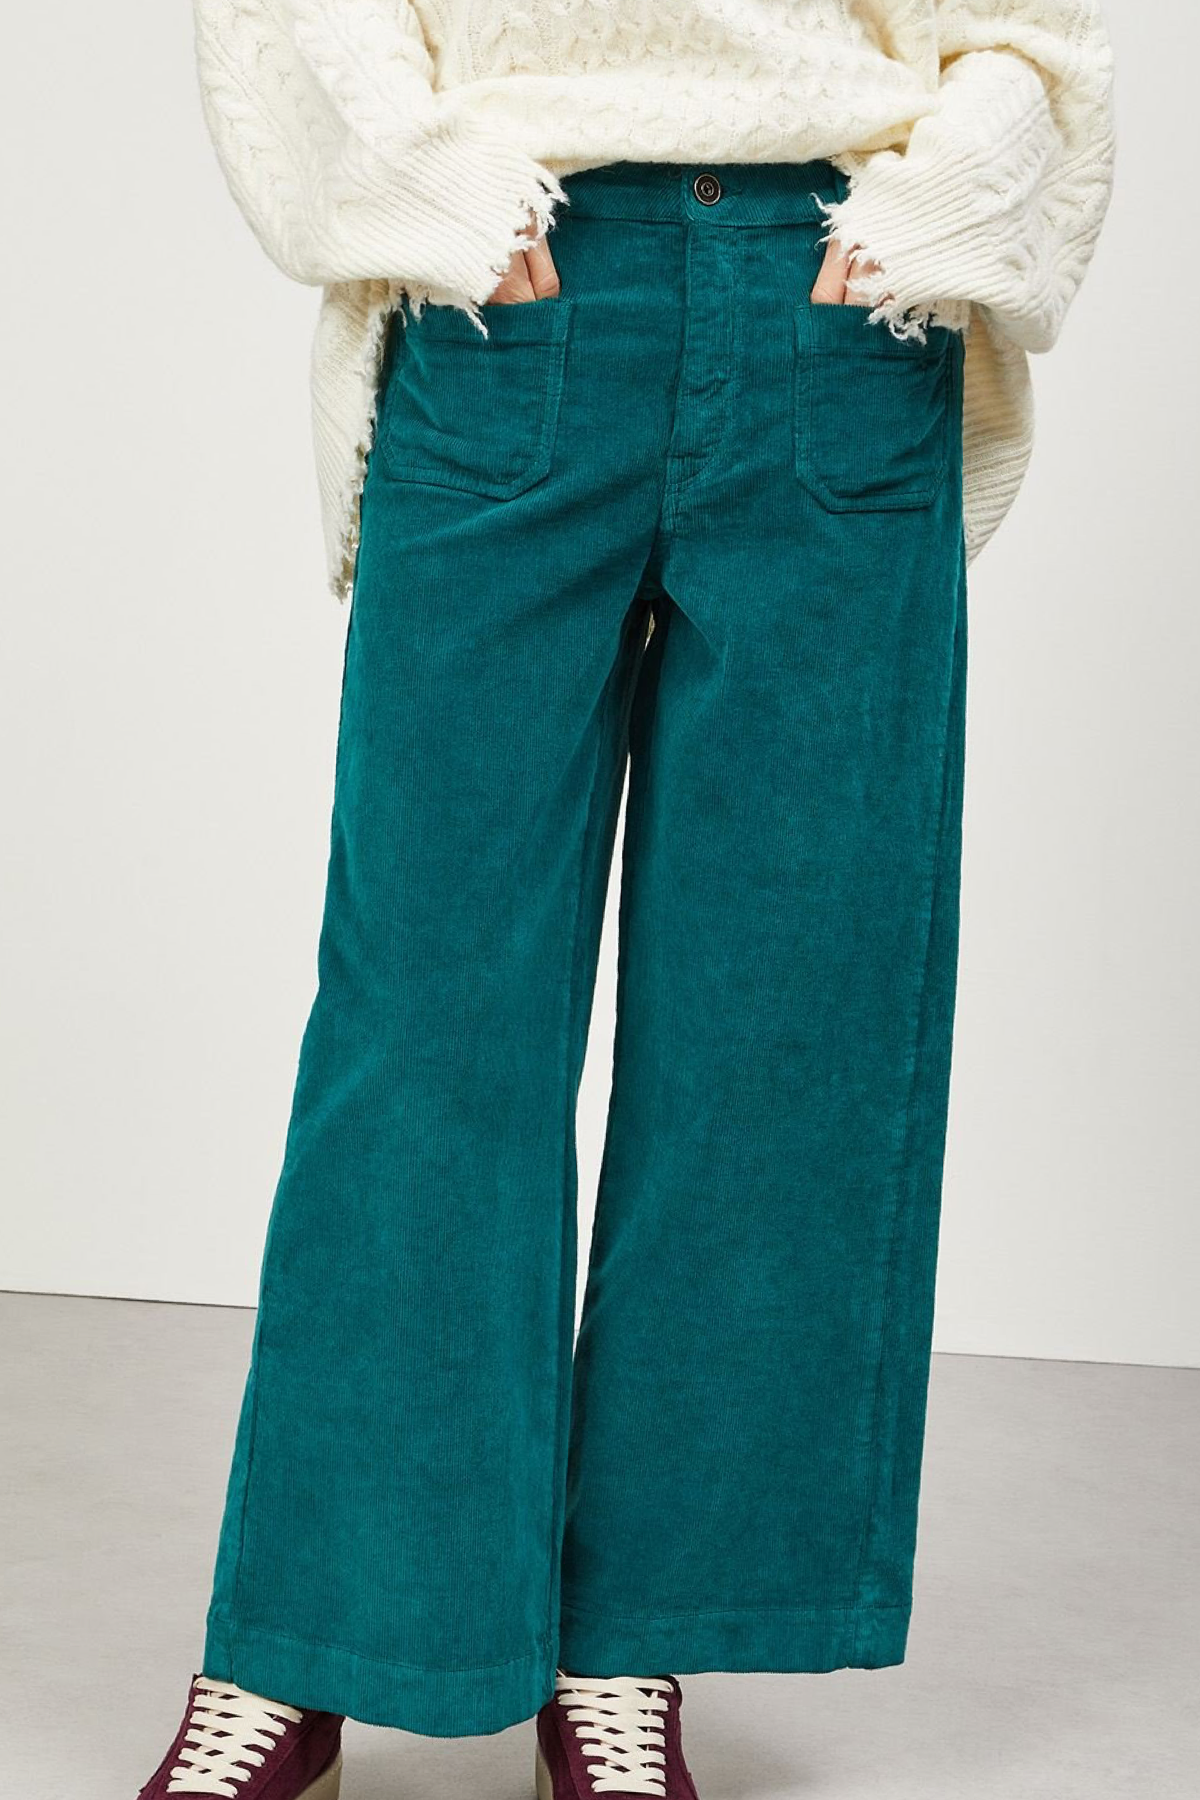 E8 OTTOD’AME JEANS CROPPED FRENCH VERDE 9150